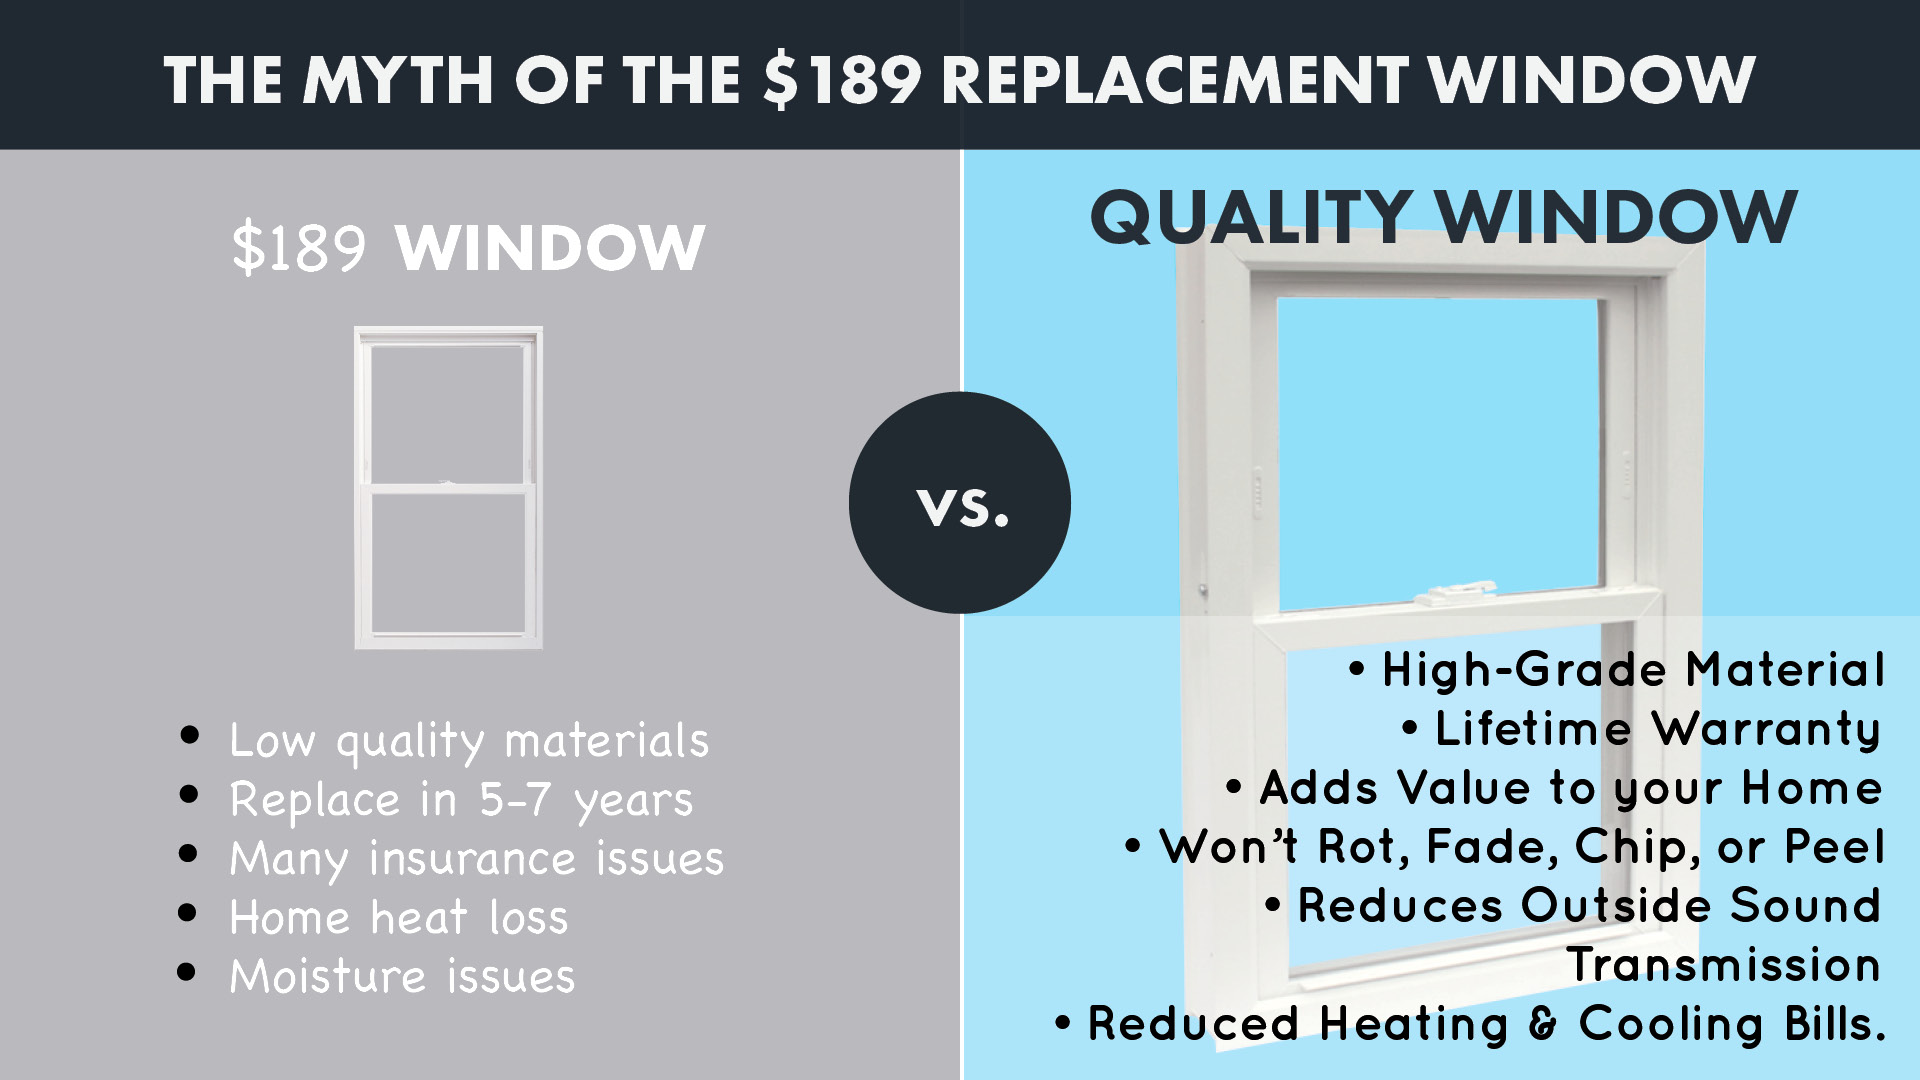 The Myth of the $189 Replacement Window